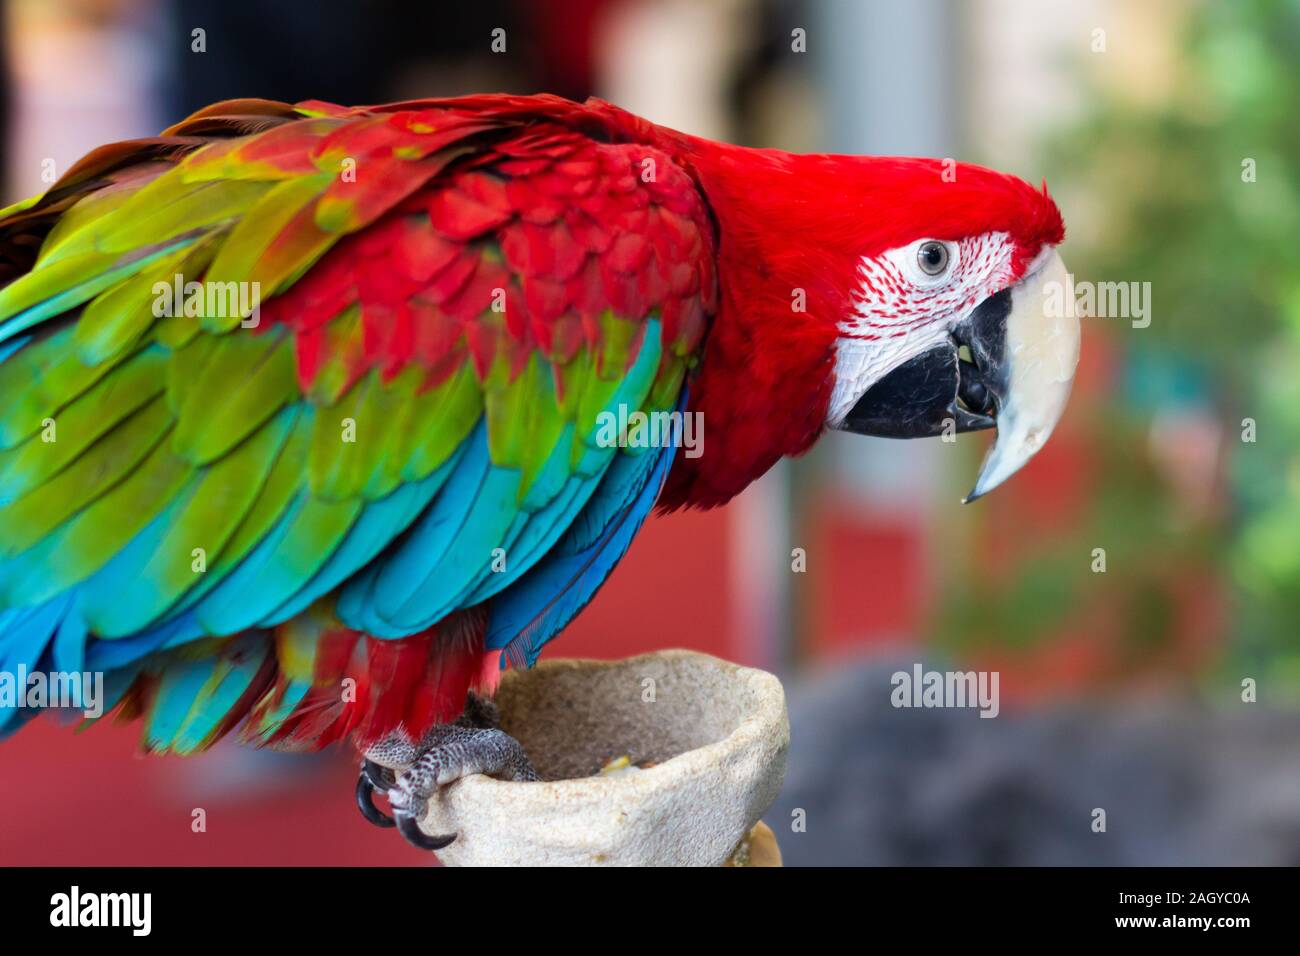 Portrait of a beautiful colorful Ara Scarlet Macaw parrot close up. Stock Photo